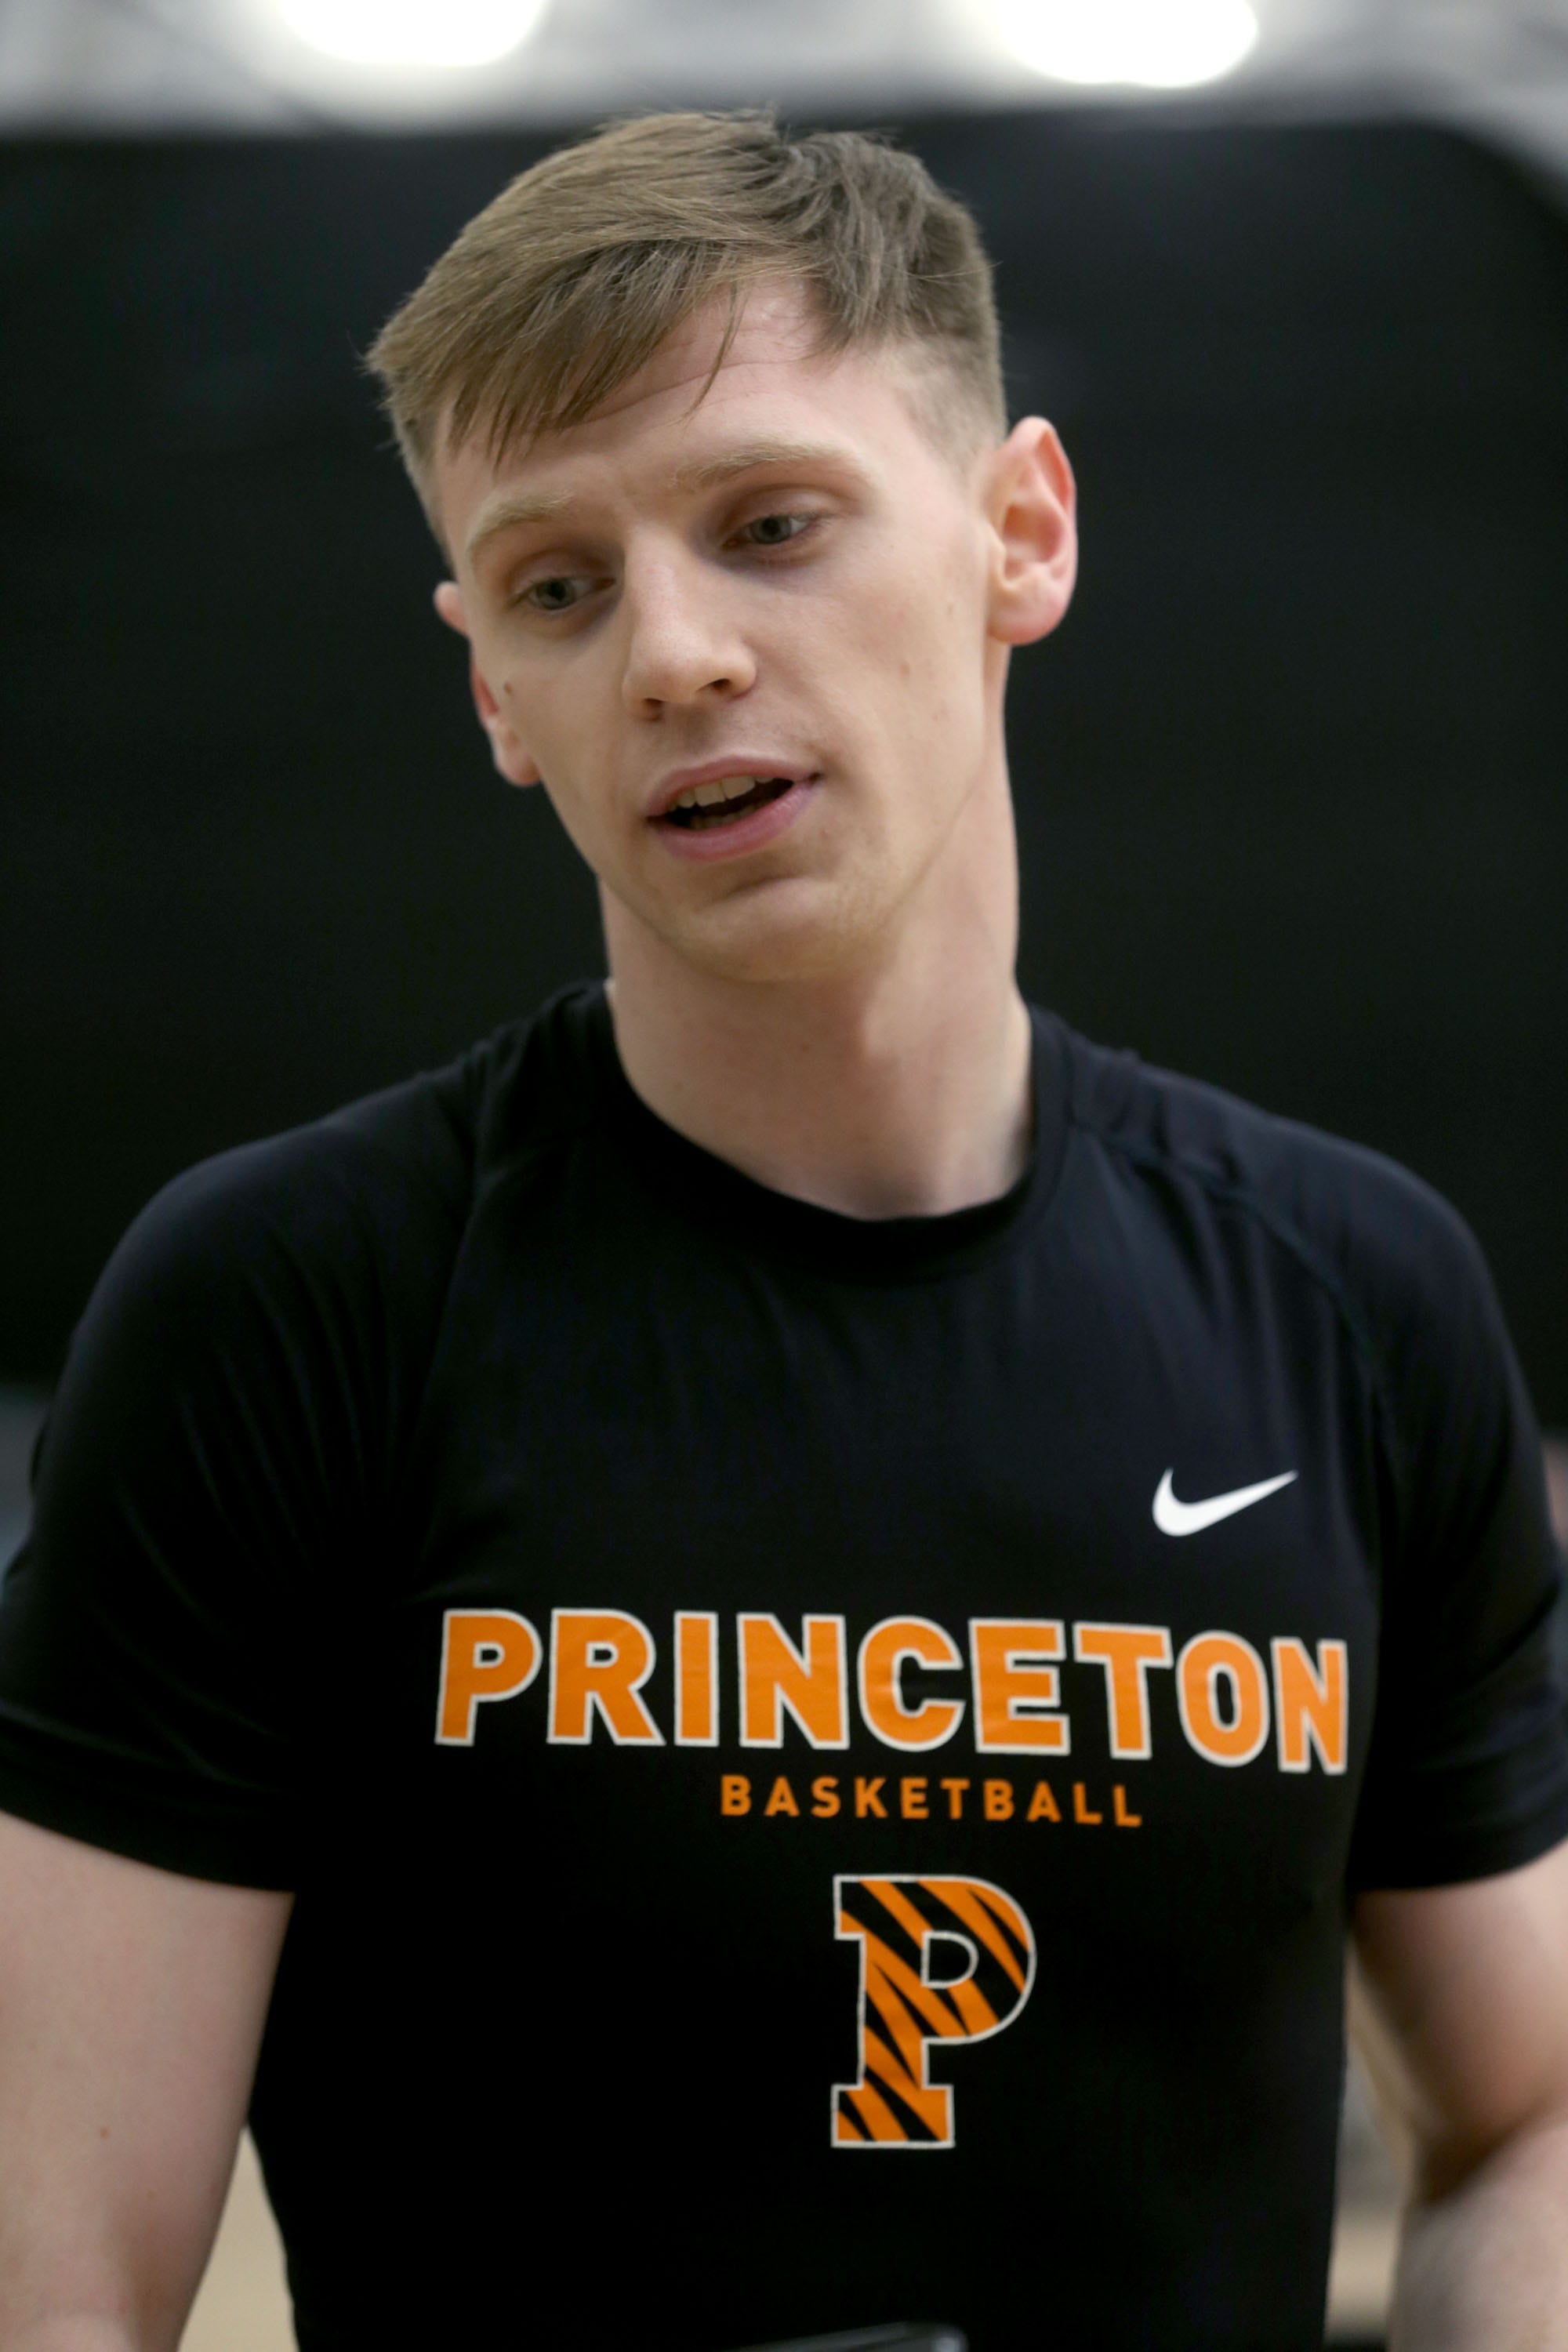 Princeton University Guard Matt Allocco speaks with the media at the University's Jadwin Gym Monday afternoon, March 20, 2023. The team were preparing for their NCAA Sweet 16 appearance.

Basketball Princeton Men S Basketball Sweet 16 Team Practice